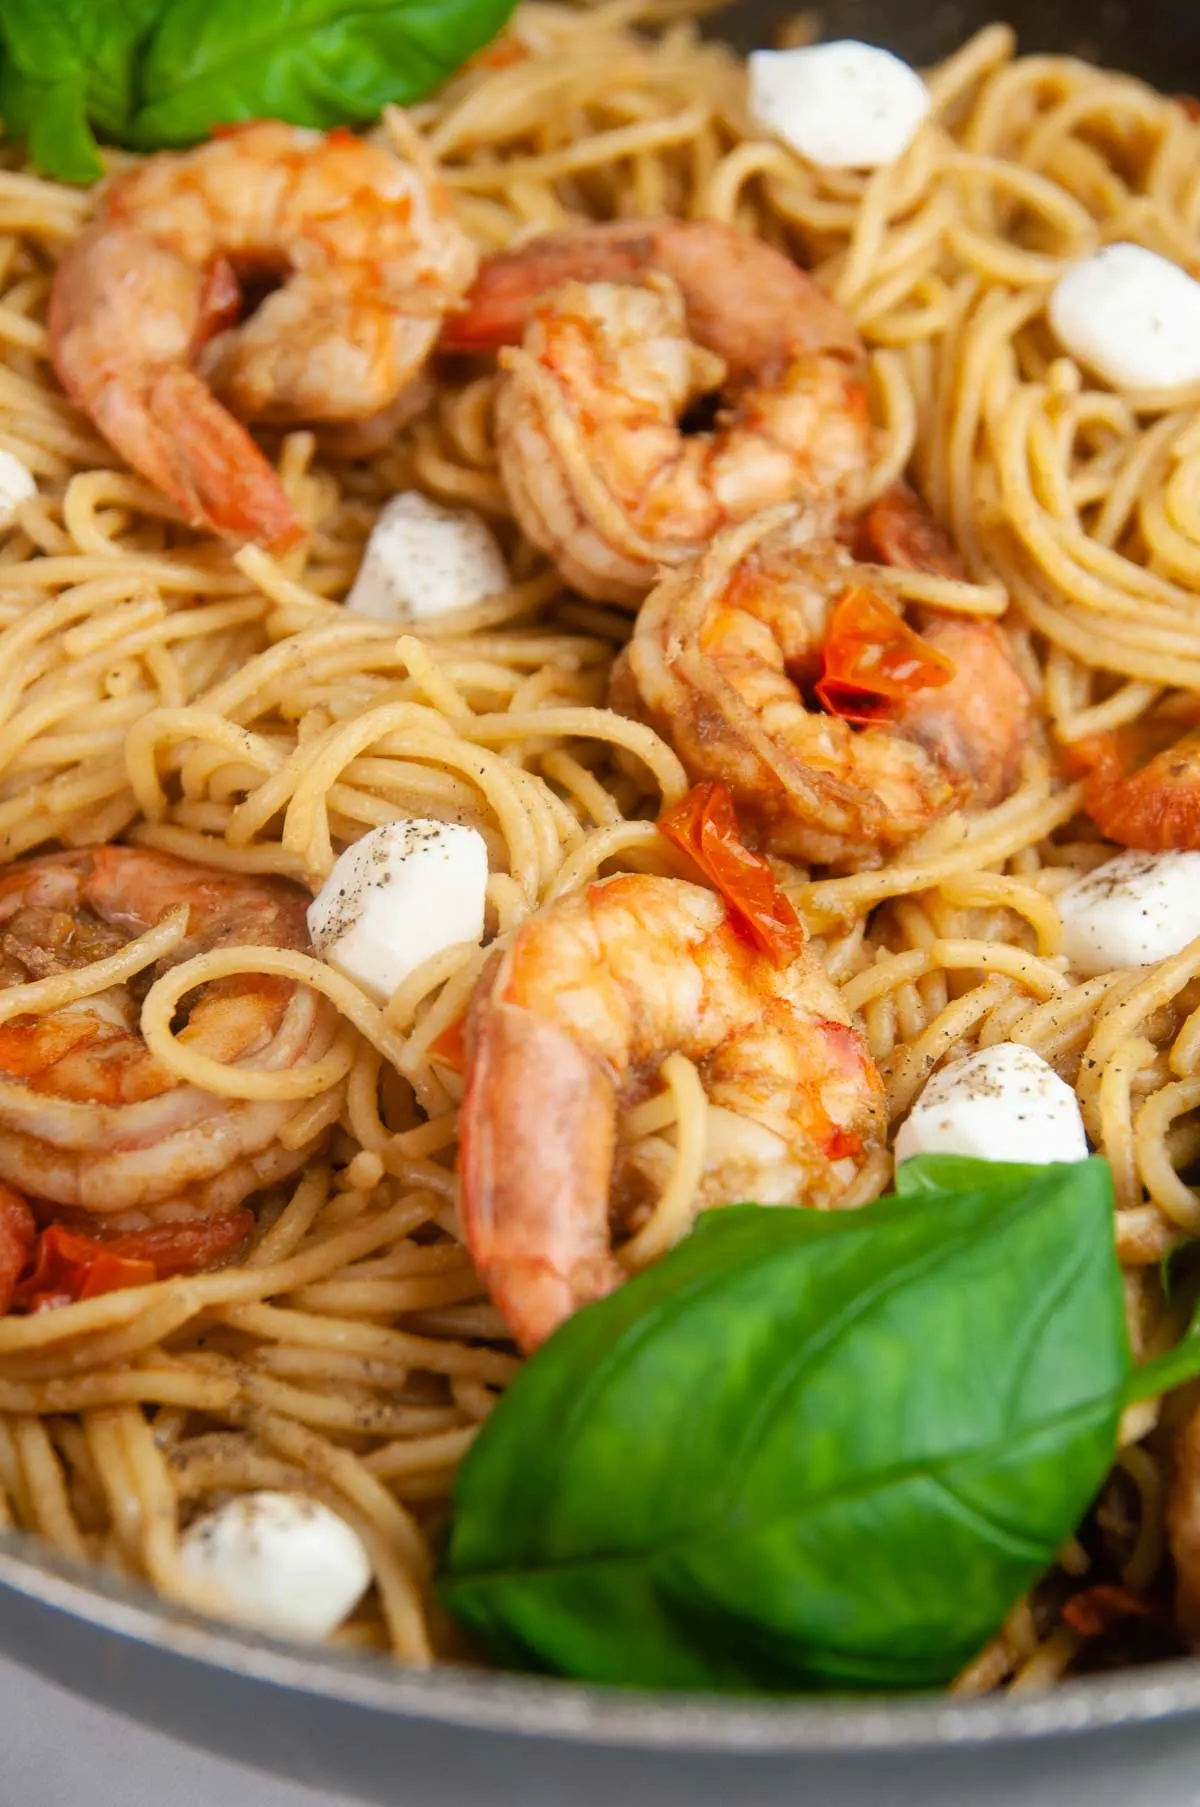 Shrimp Caprese pasta is an easy seafood pasta dish featuring shrimp, tomatoes, and mozzarella in a balsamic wine glaze. Perfect for entertaining or date night in but easy enough for any day.